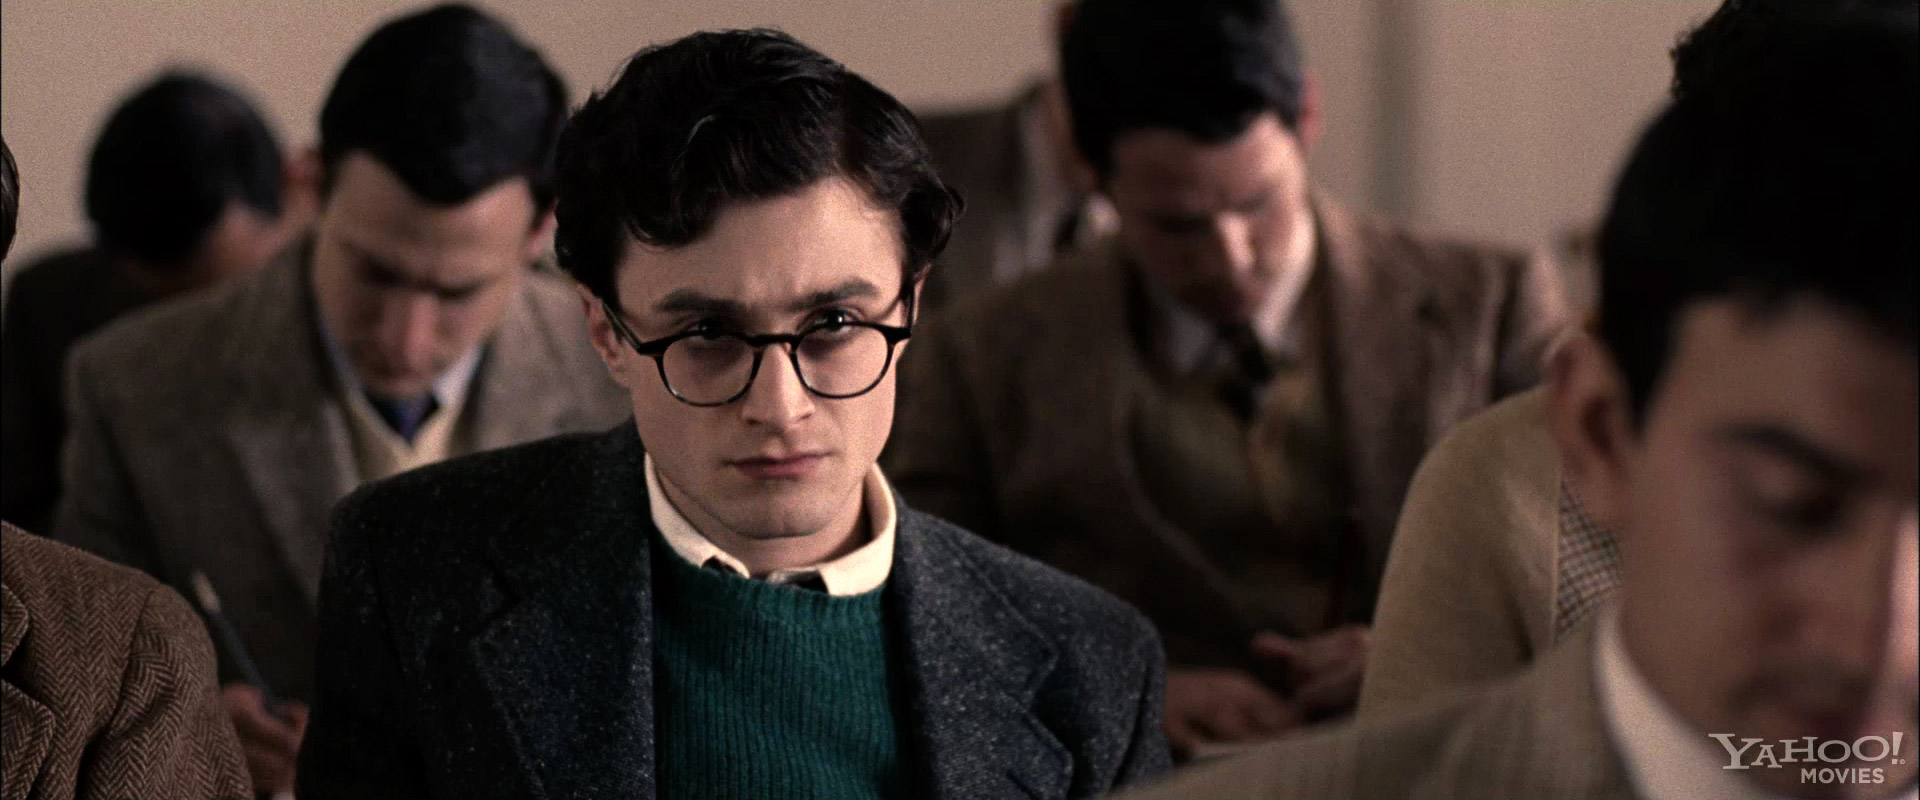 trailer-for-kill-your-darlings-with-daniel-radcliffe-05.jpg